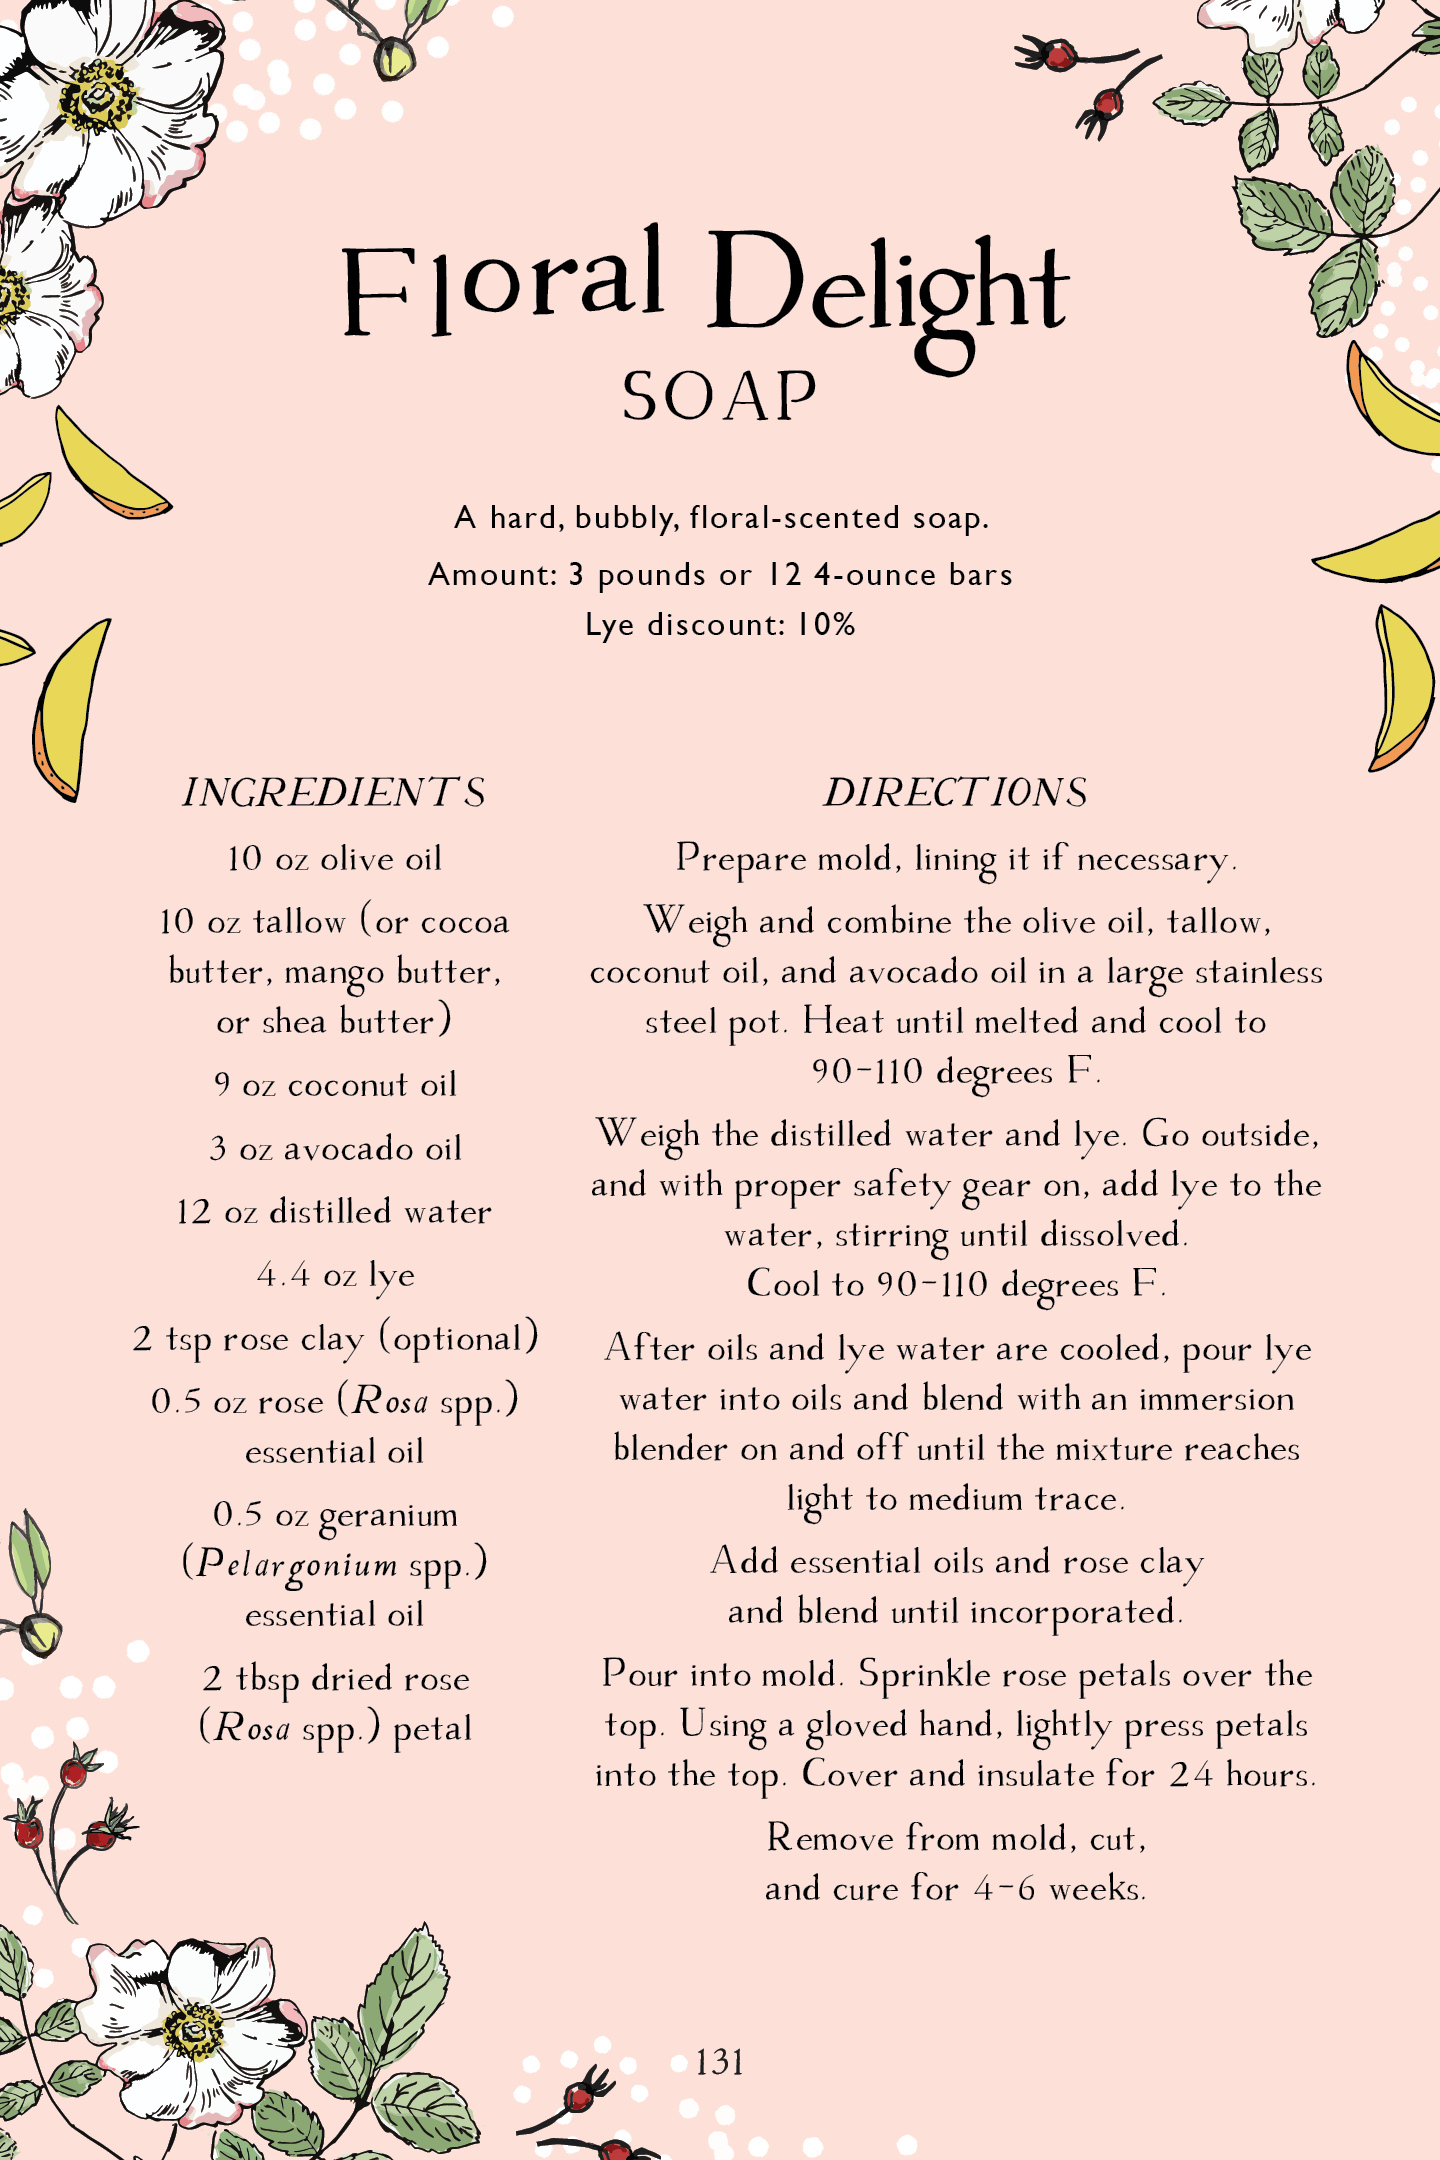 Botanical Skin Care Recipe Book Page Preview – Floral Delight Soap